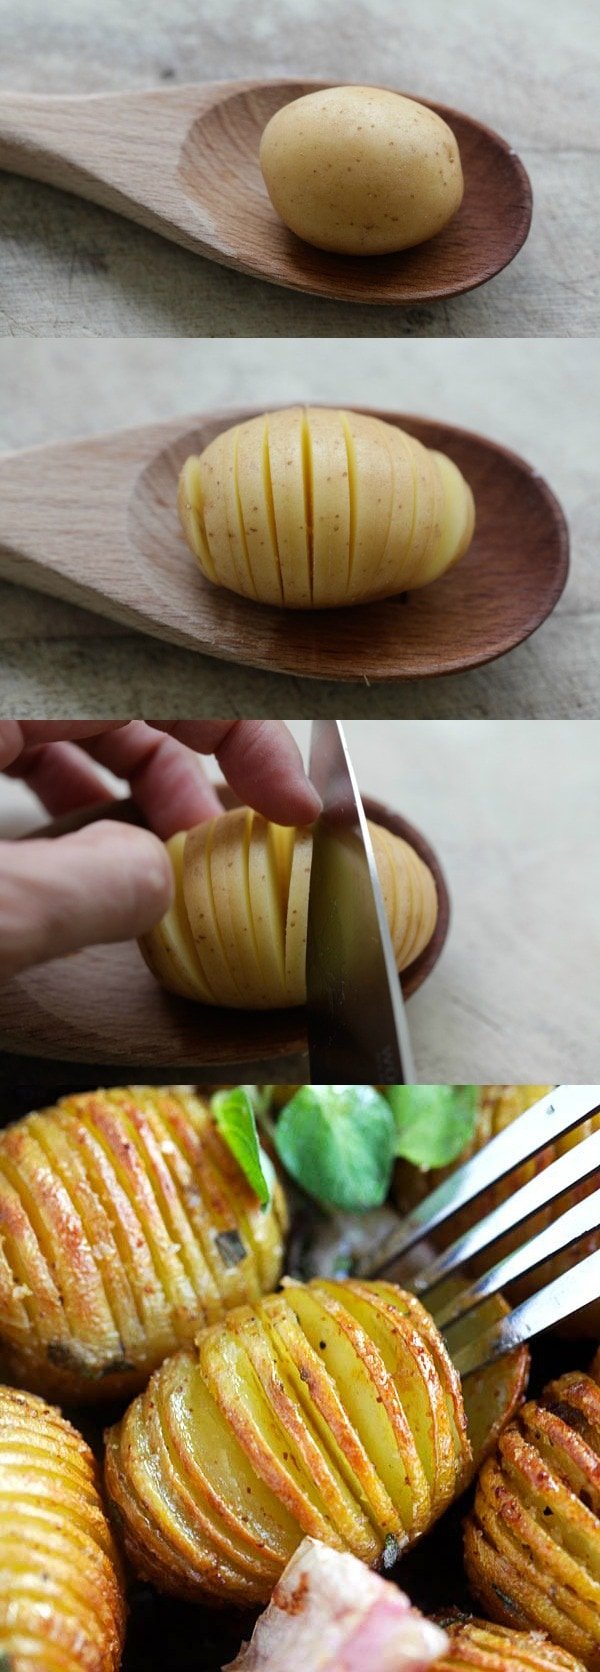 How to Slice Hasselback Potatoes - learn the step-by-step picture guide on how to cut potatoes into hasselback potatoes with a secret kitchen tool and a sharp knife | rasamalaysia.com